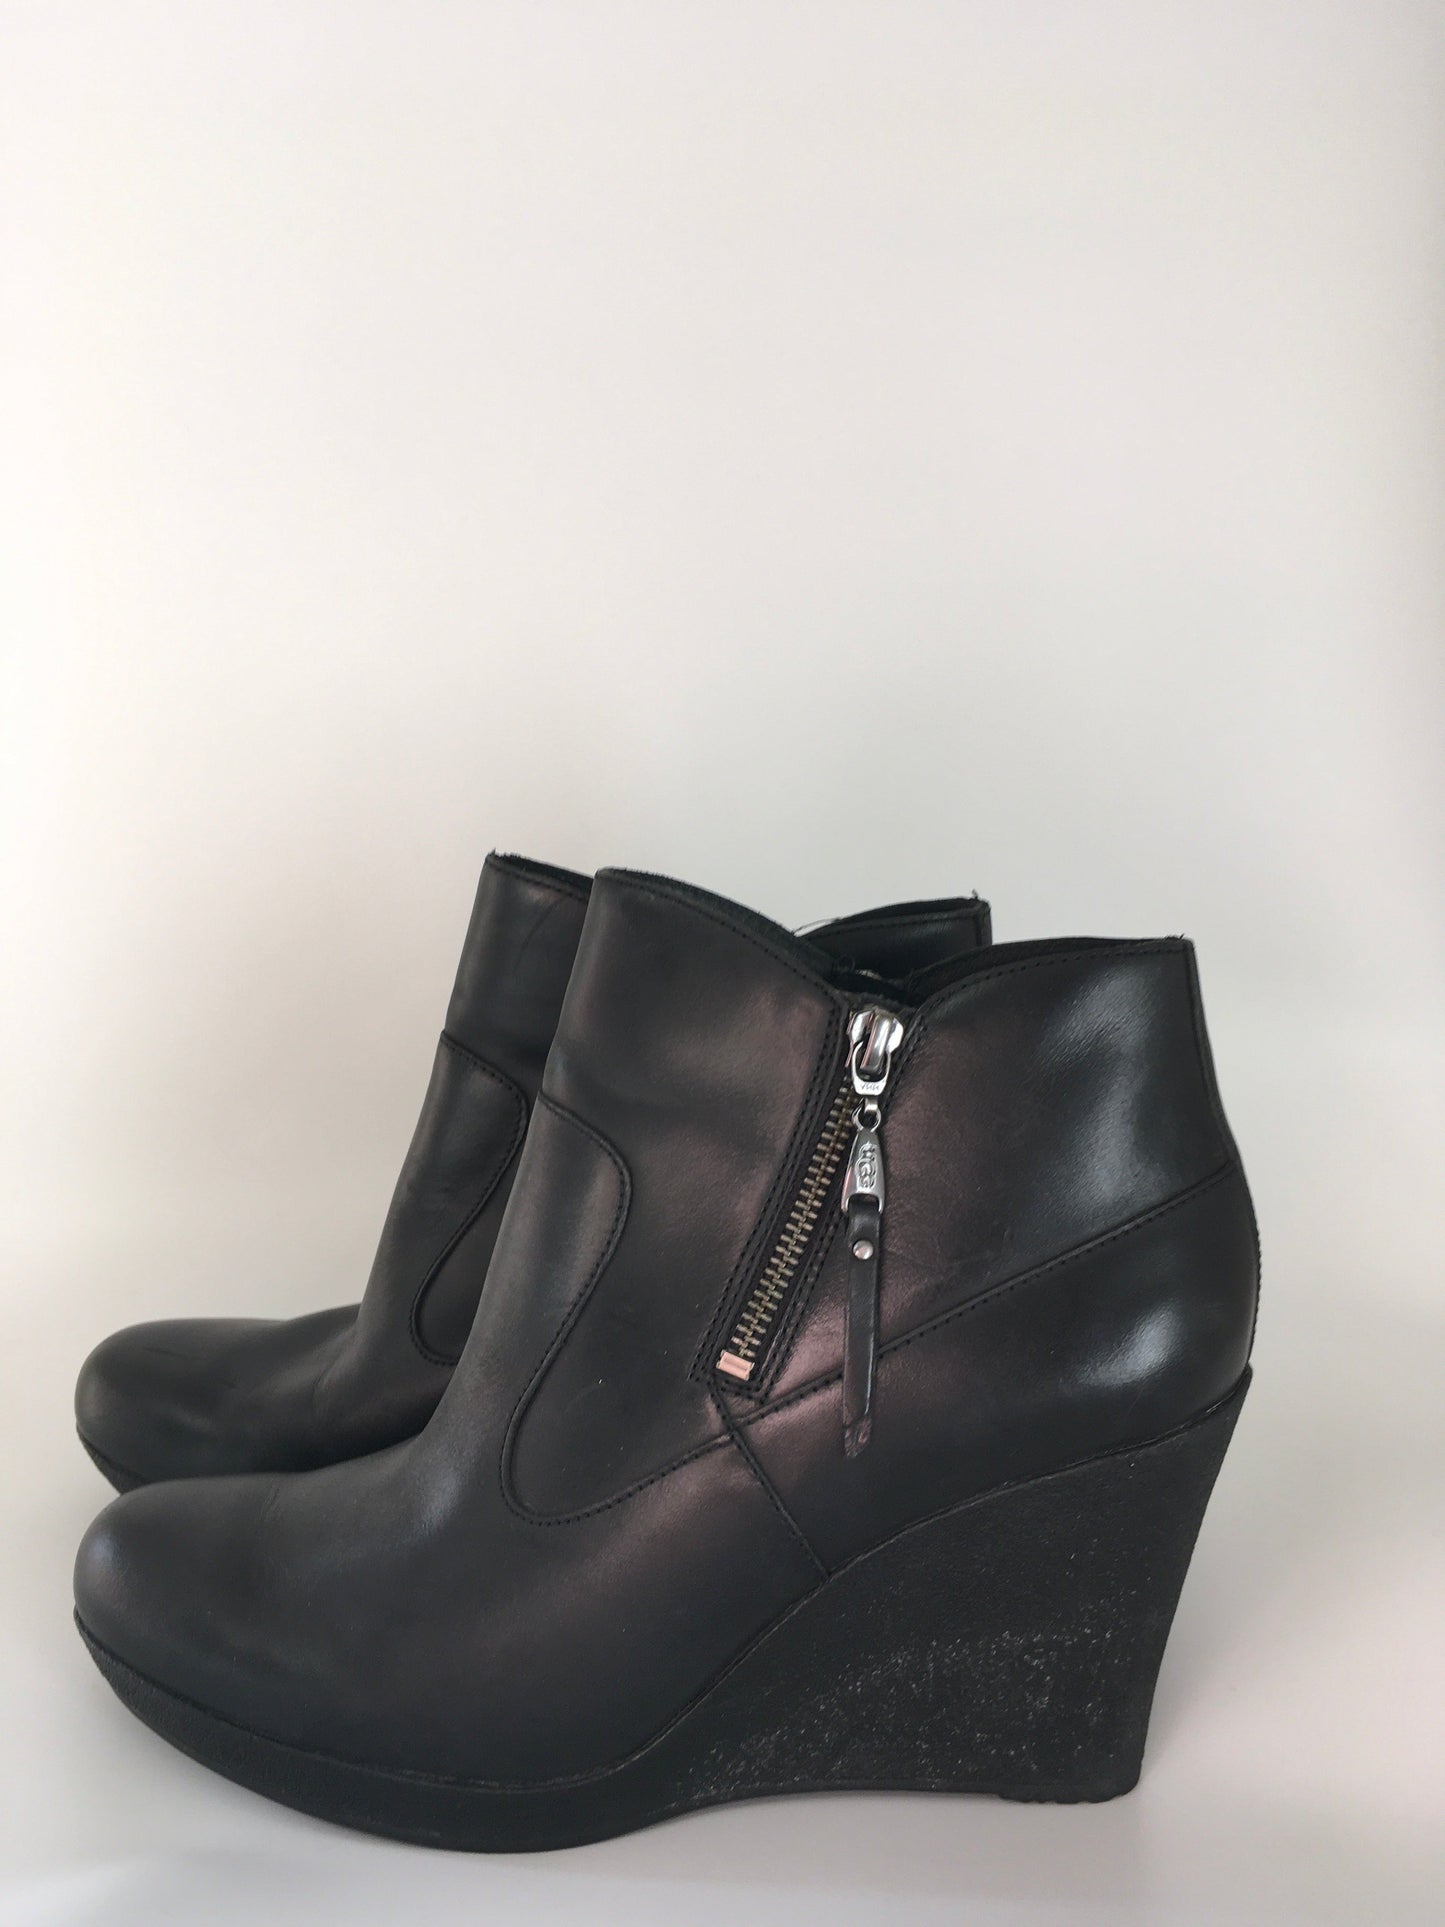 Boots Ankle Heels By Ugg  Size: 9.5